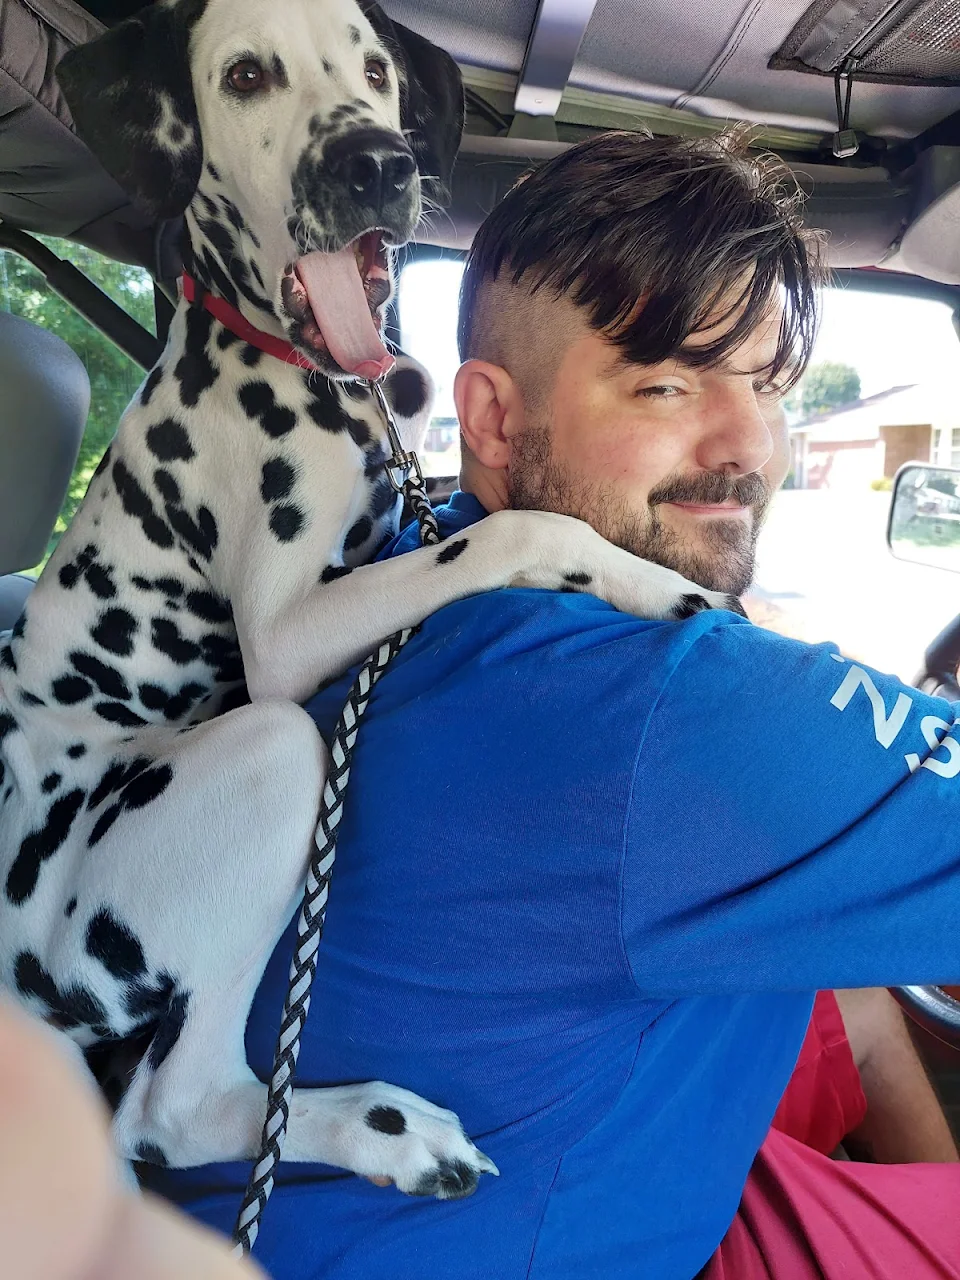 My Dalmatian thinks he's a backpack